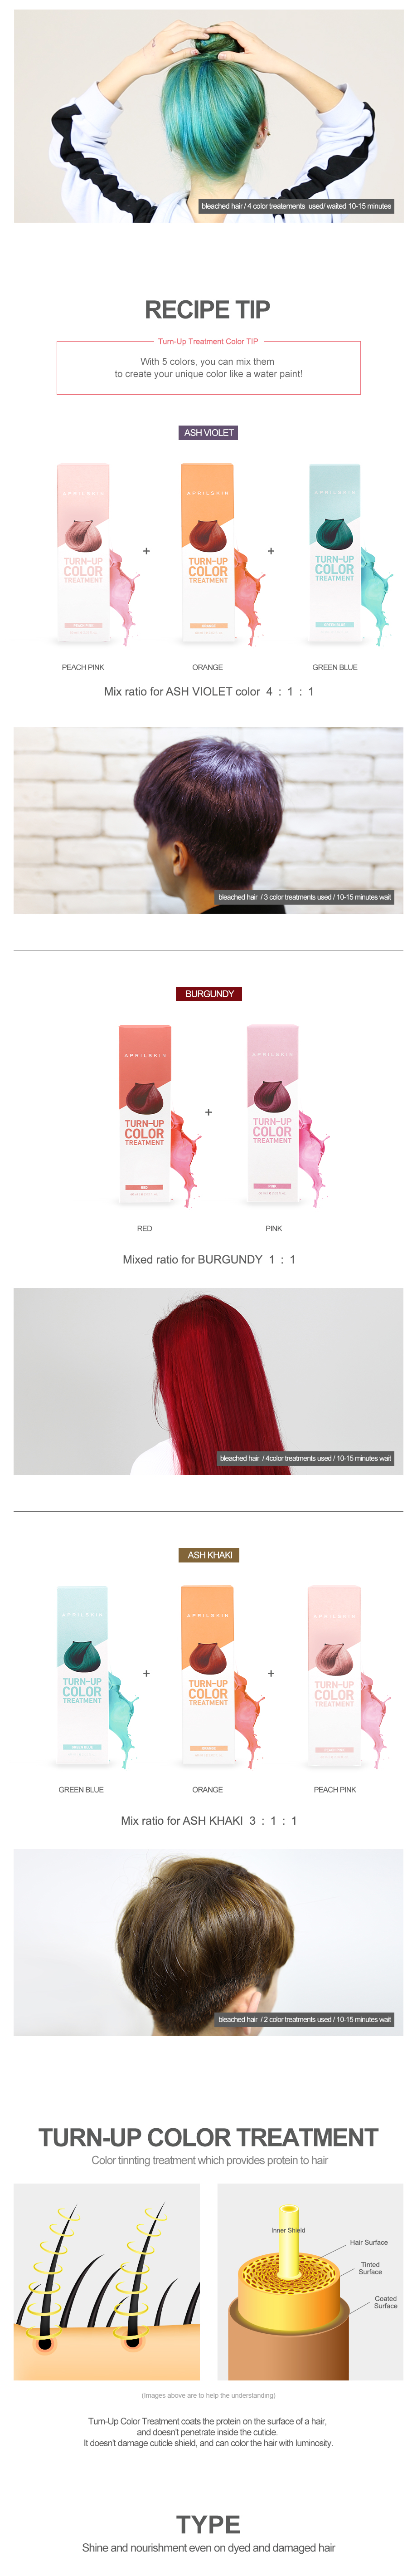 Turn-Up Color Treatment #Red 60ml